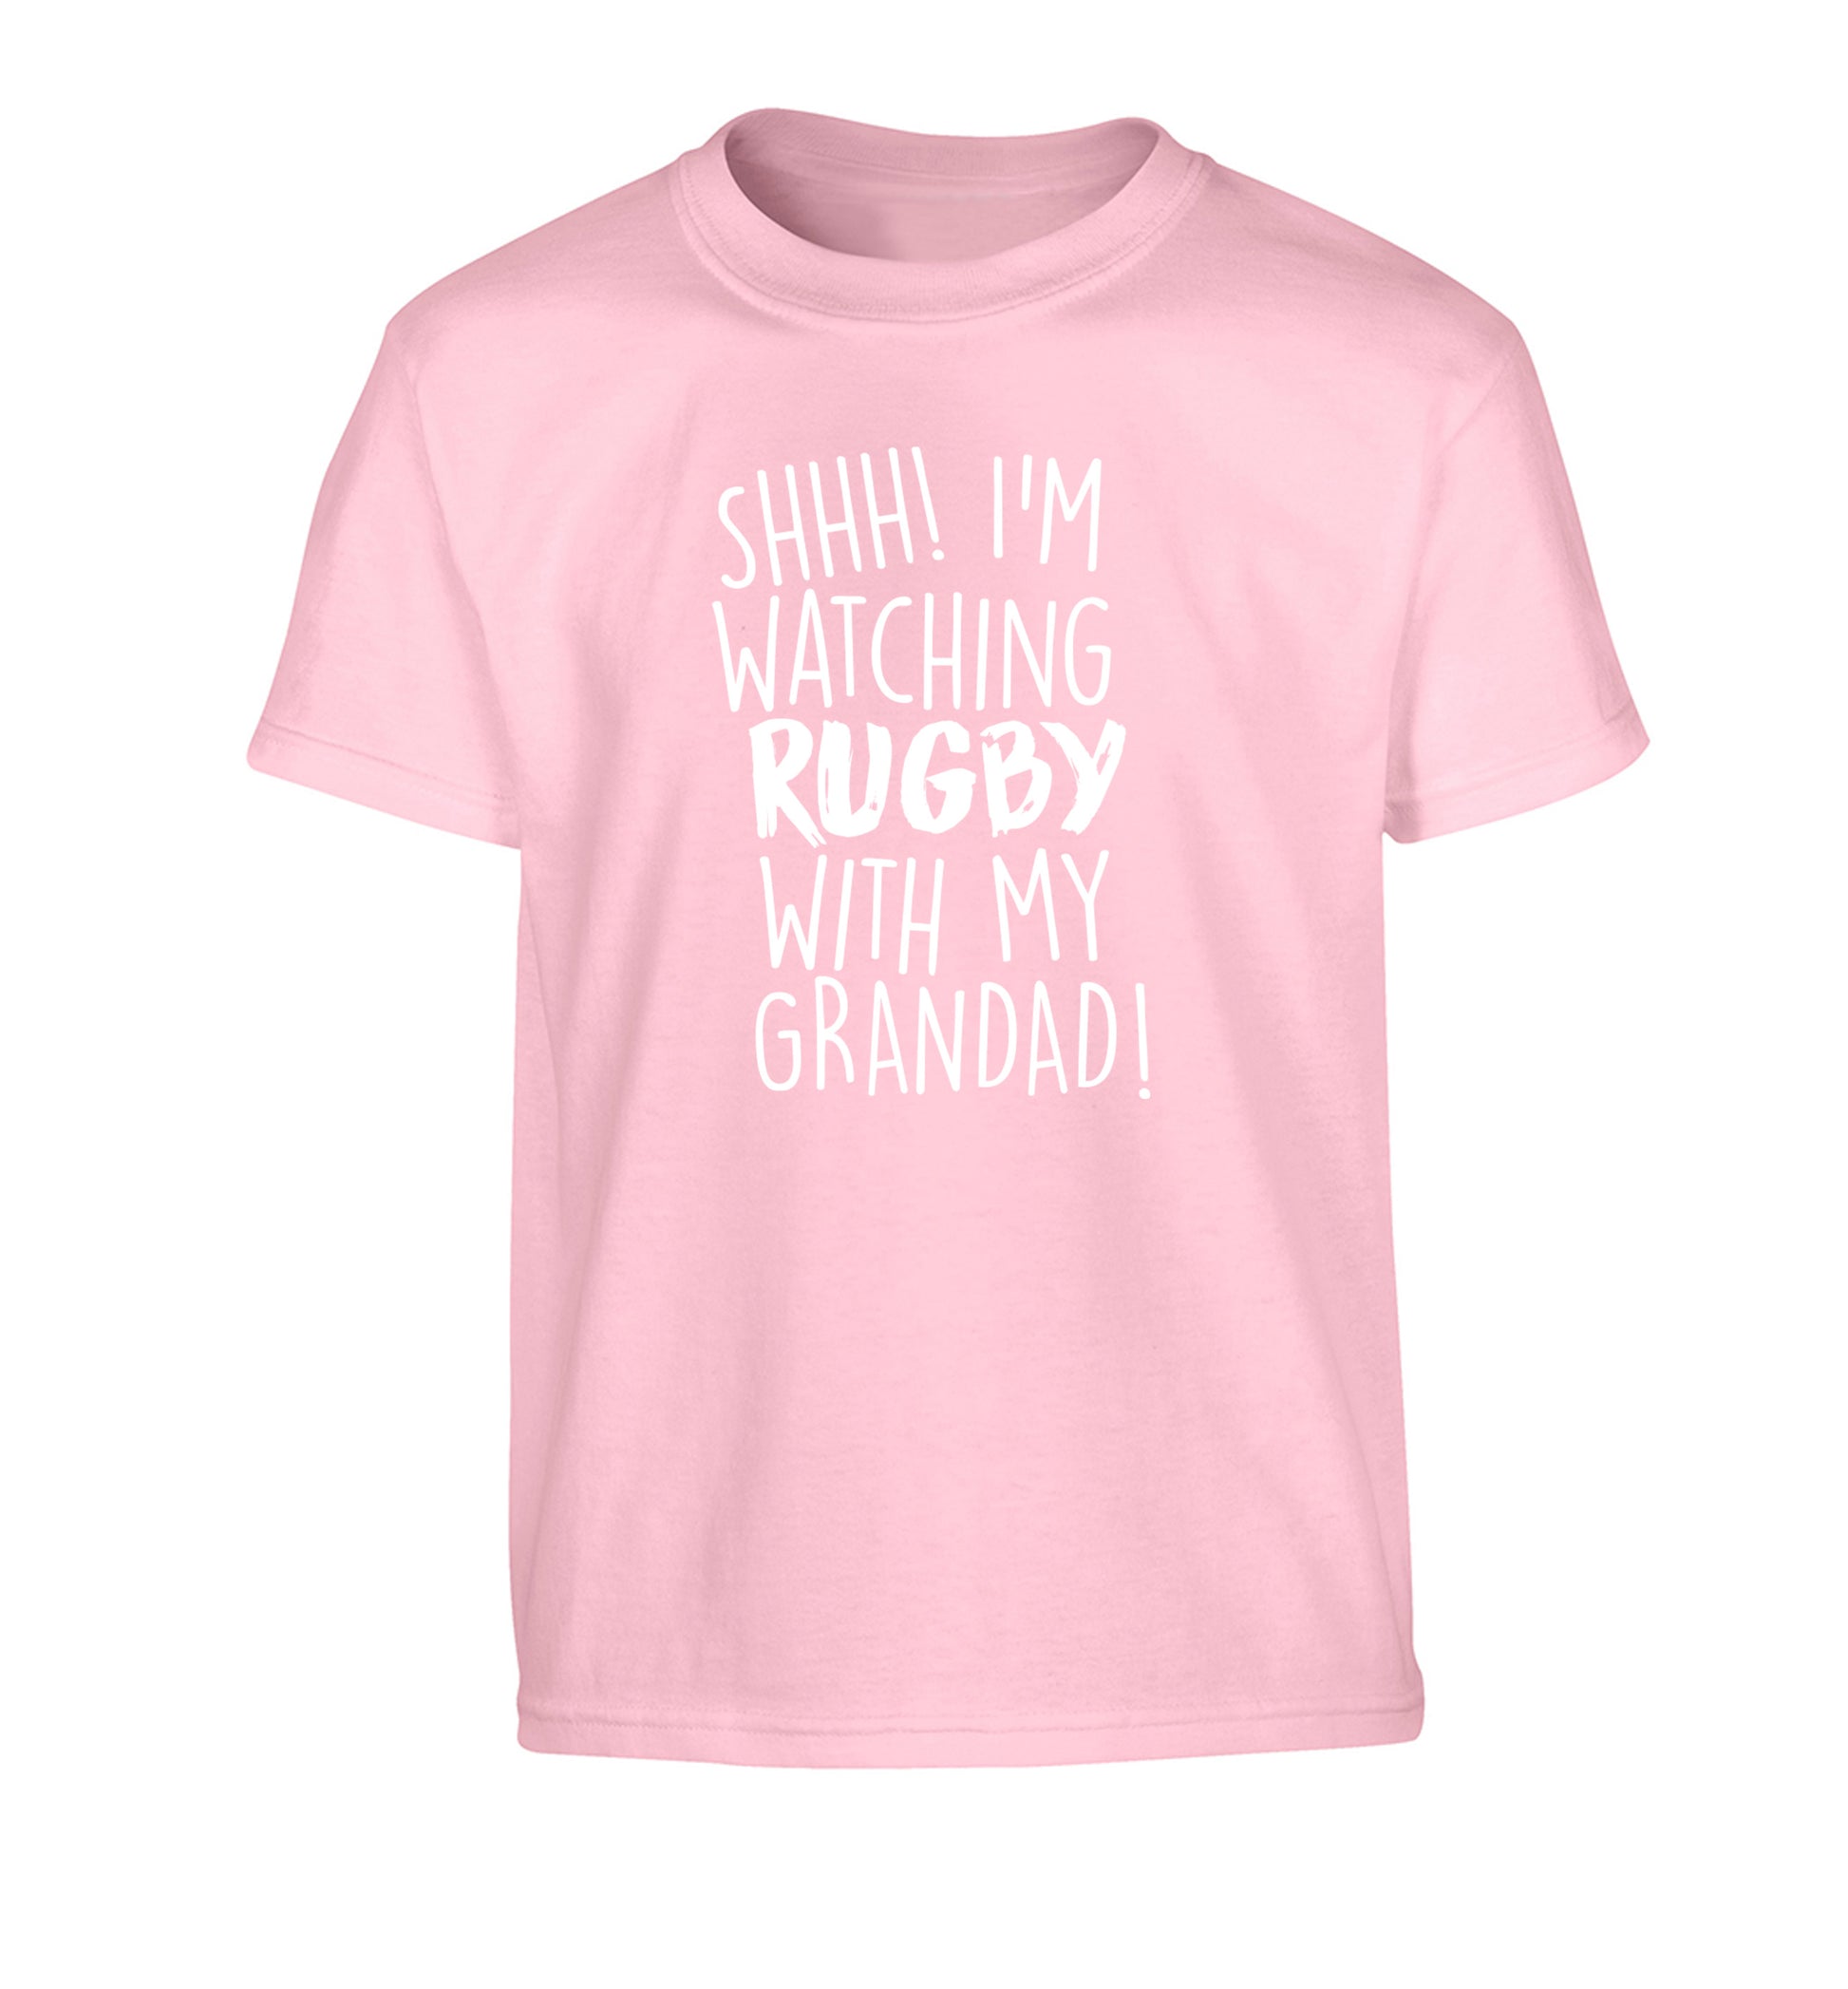 Shh I'm watching rugby with my grandad Children's light pink Tshirt 12-13 Years